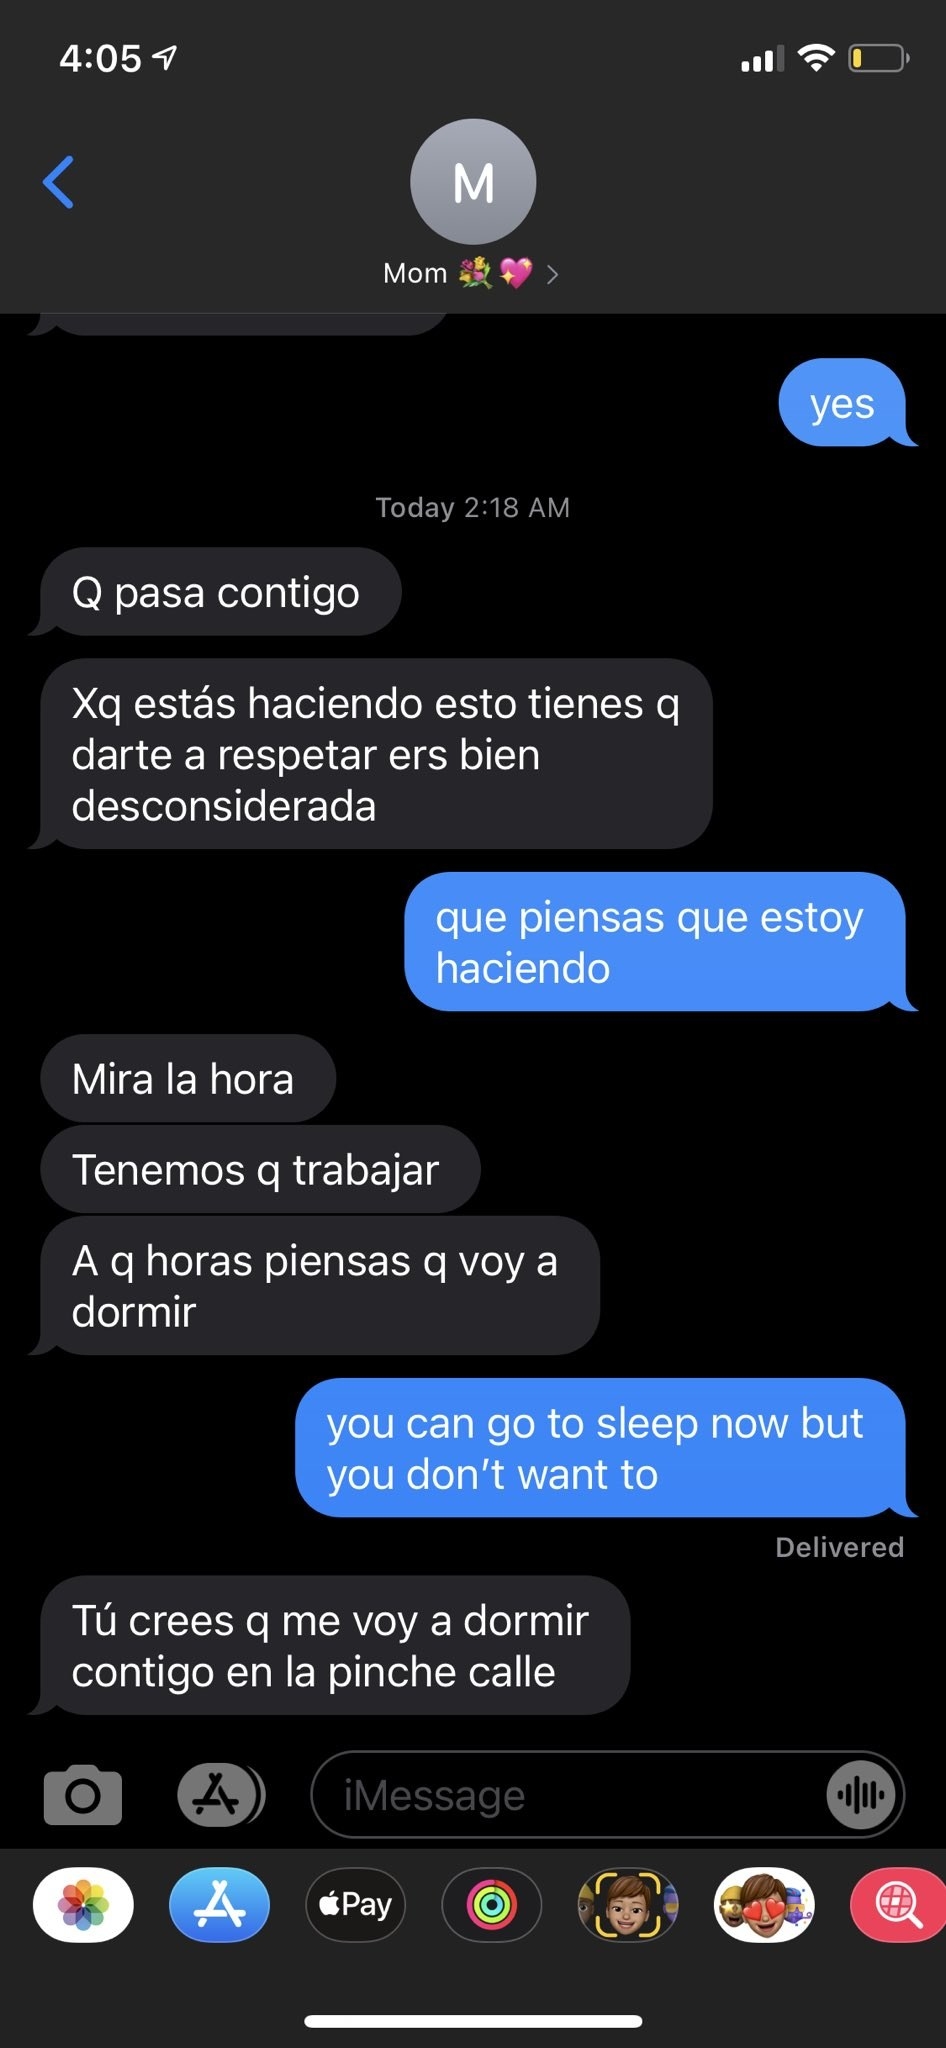 Text in Spanish translated below